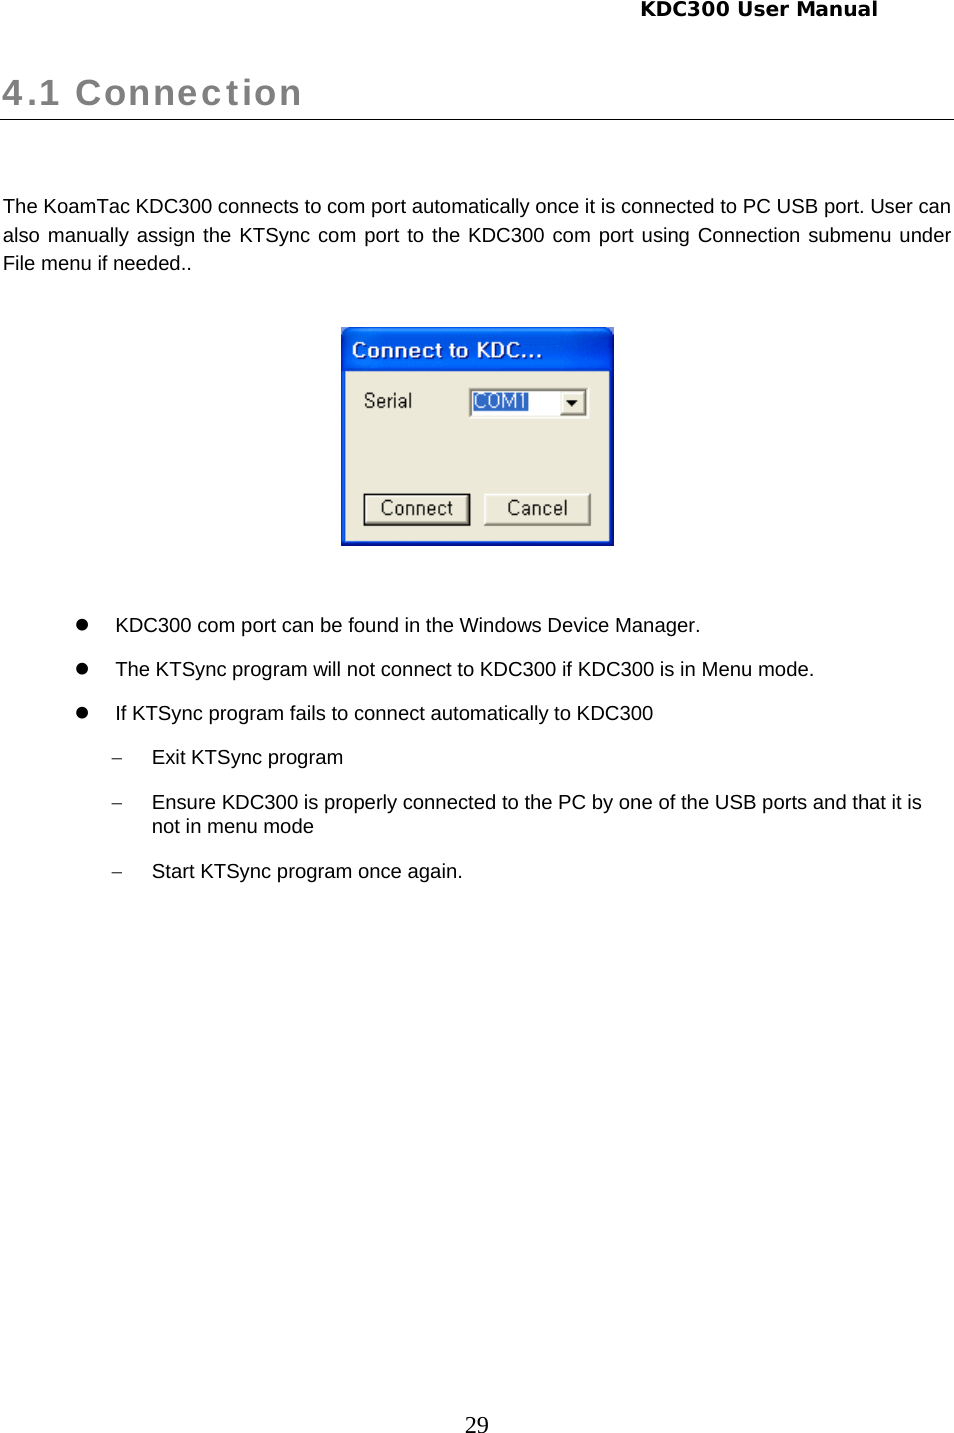     KDC300 User Manual 29 4.1 Connection   The KoamTac KDC300 connects to com port automatically once it is connected to PC USB port. User can also manually assign the KTSync com port to the KDC300 com port using Connection submenu under File menu if needed..     z  KDC300 com port can be found in the Windows Device Manager. z  The KTSync program will not connect to KDC300 if KDC300 is in Menu mode. z  If KTSync program fails to connect automatically to KDC300  − Exit KTSync program −  Ensure KDC300 is properly connected to the PC by one of the USB ports and that it is not in menu mode −  Start KTSync program once again.  